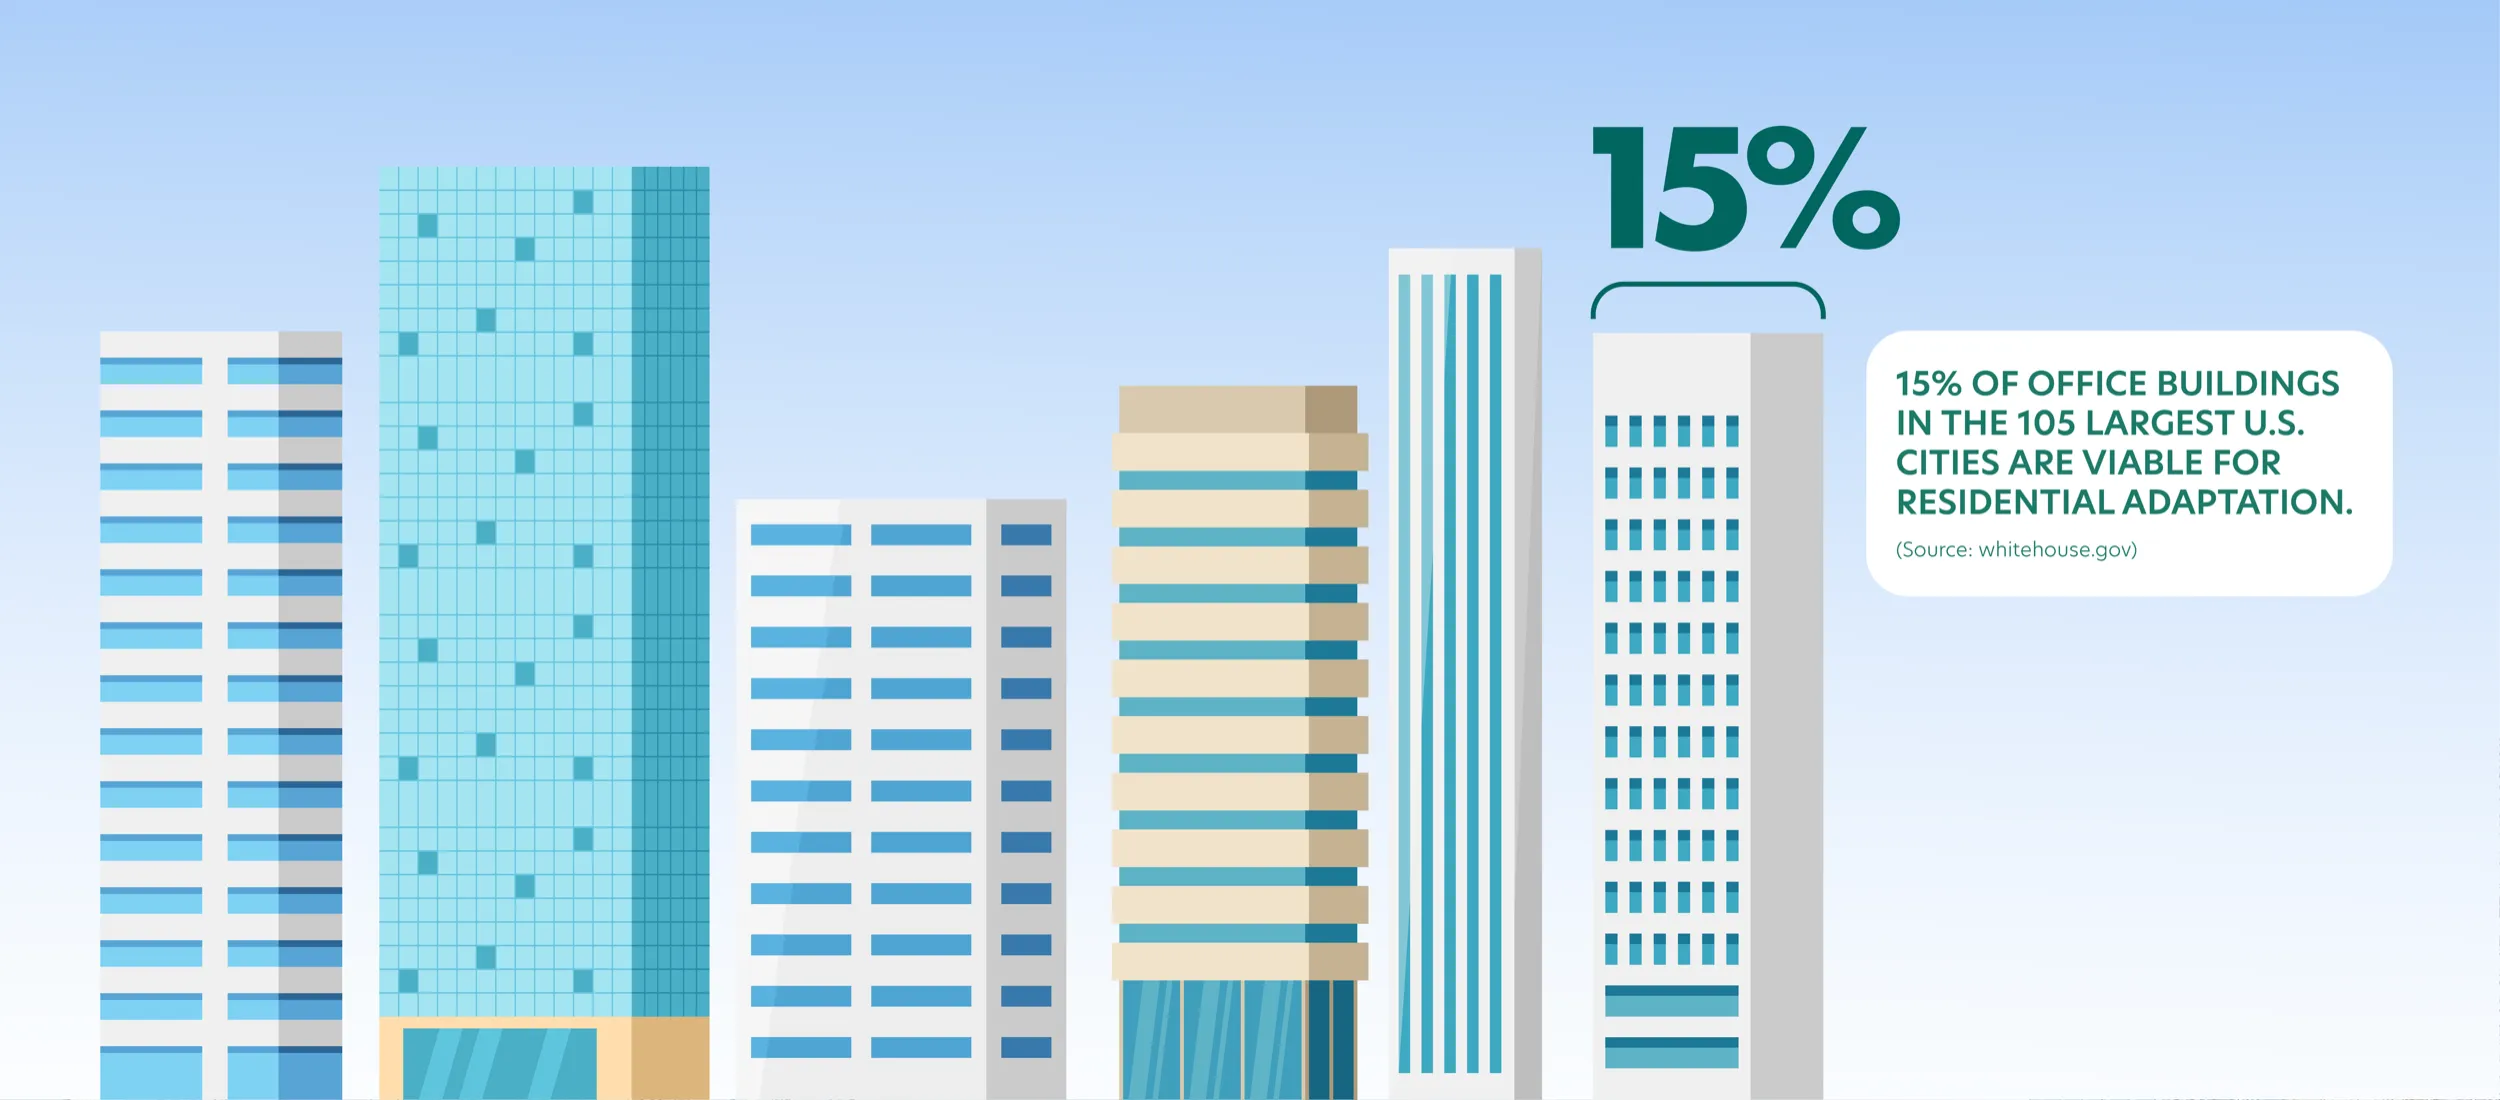 An infographic showing that 15% of office buildings in the 105 largest U.S. cities are viable for residential adaptation, according to a source from whitehouse.gov.